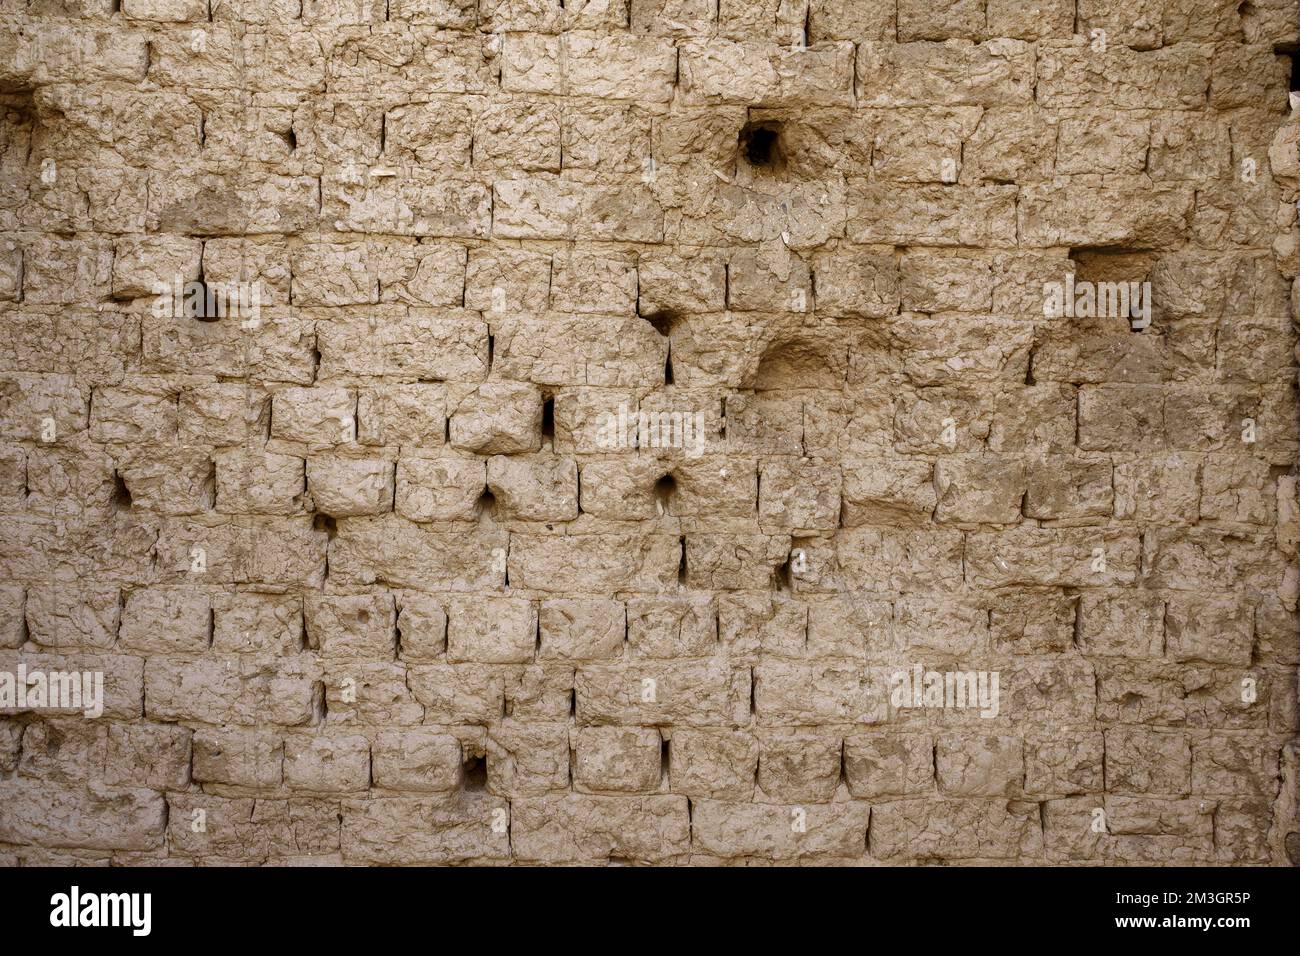 Mud-Brick walls at Ptolemaic temple , Deir el-Medina, worker's village near Valley of The Kings, West Bank of Nile, Luxor, Egypt Stock Photo